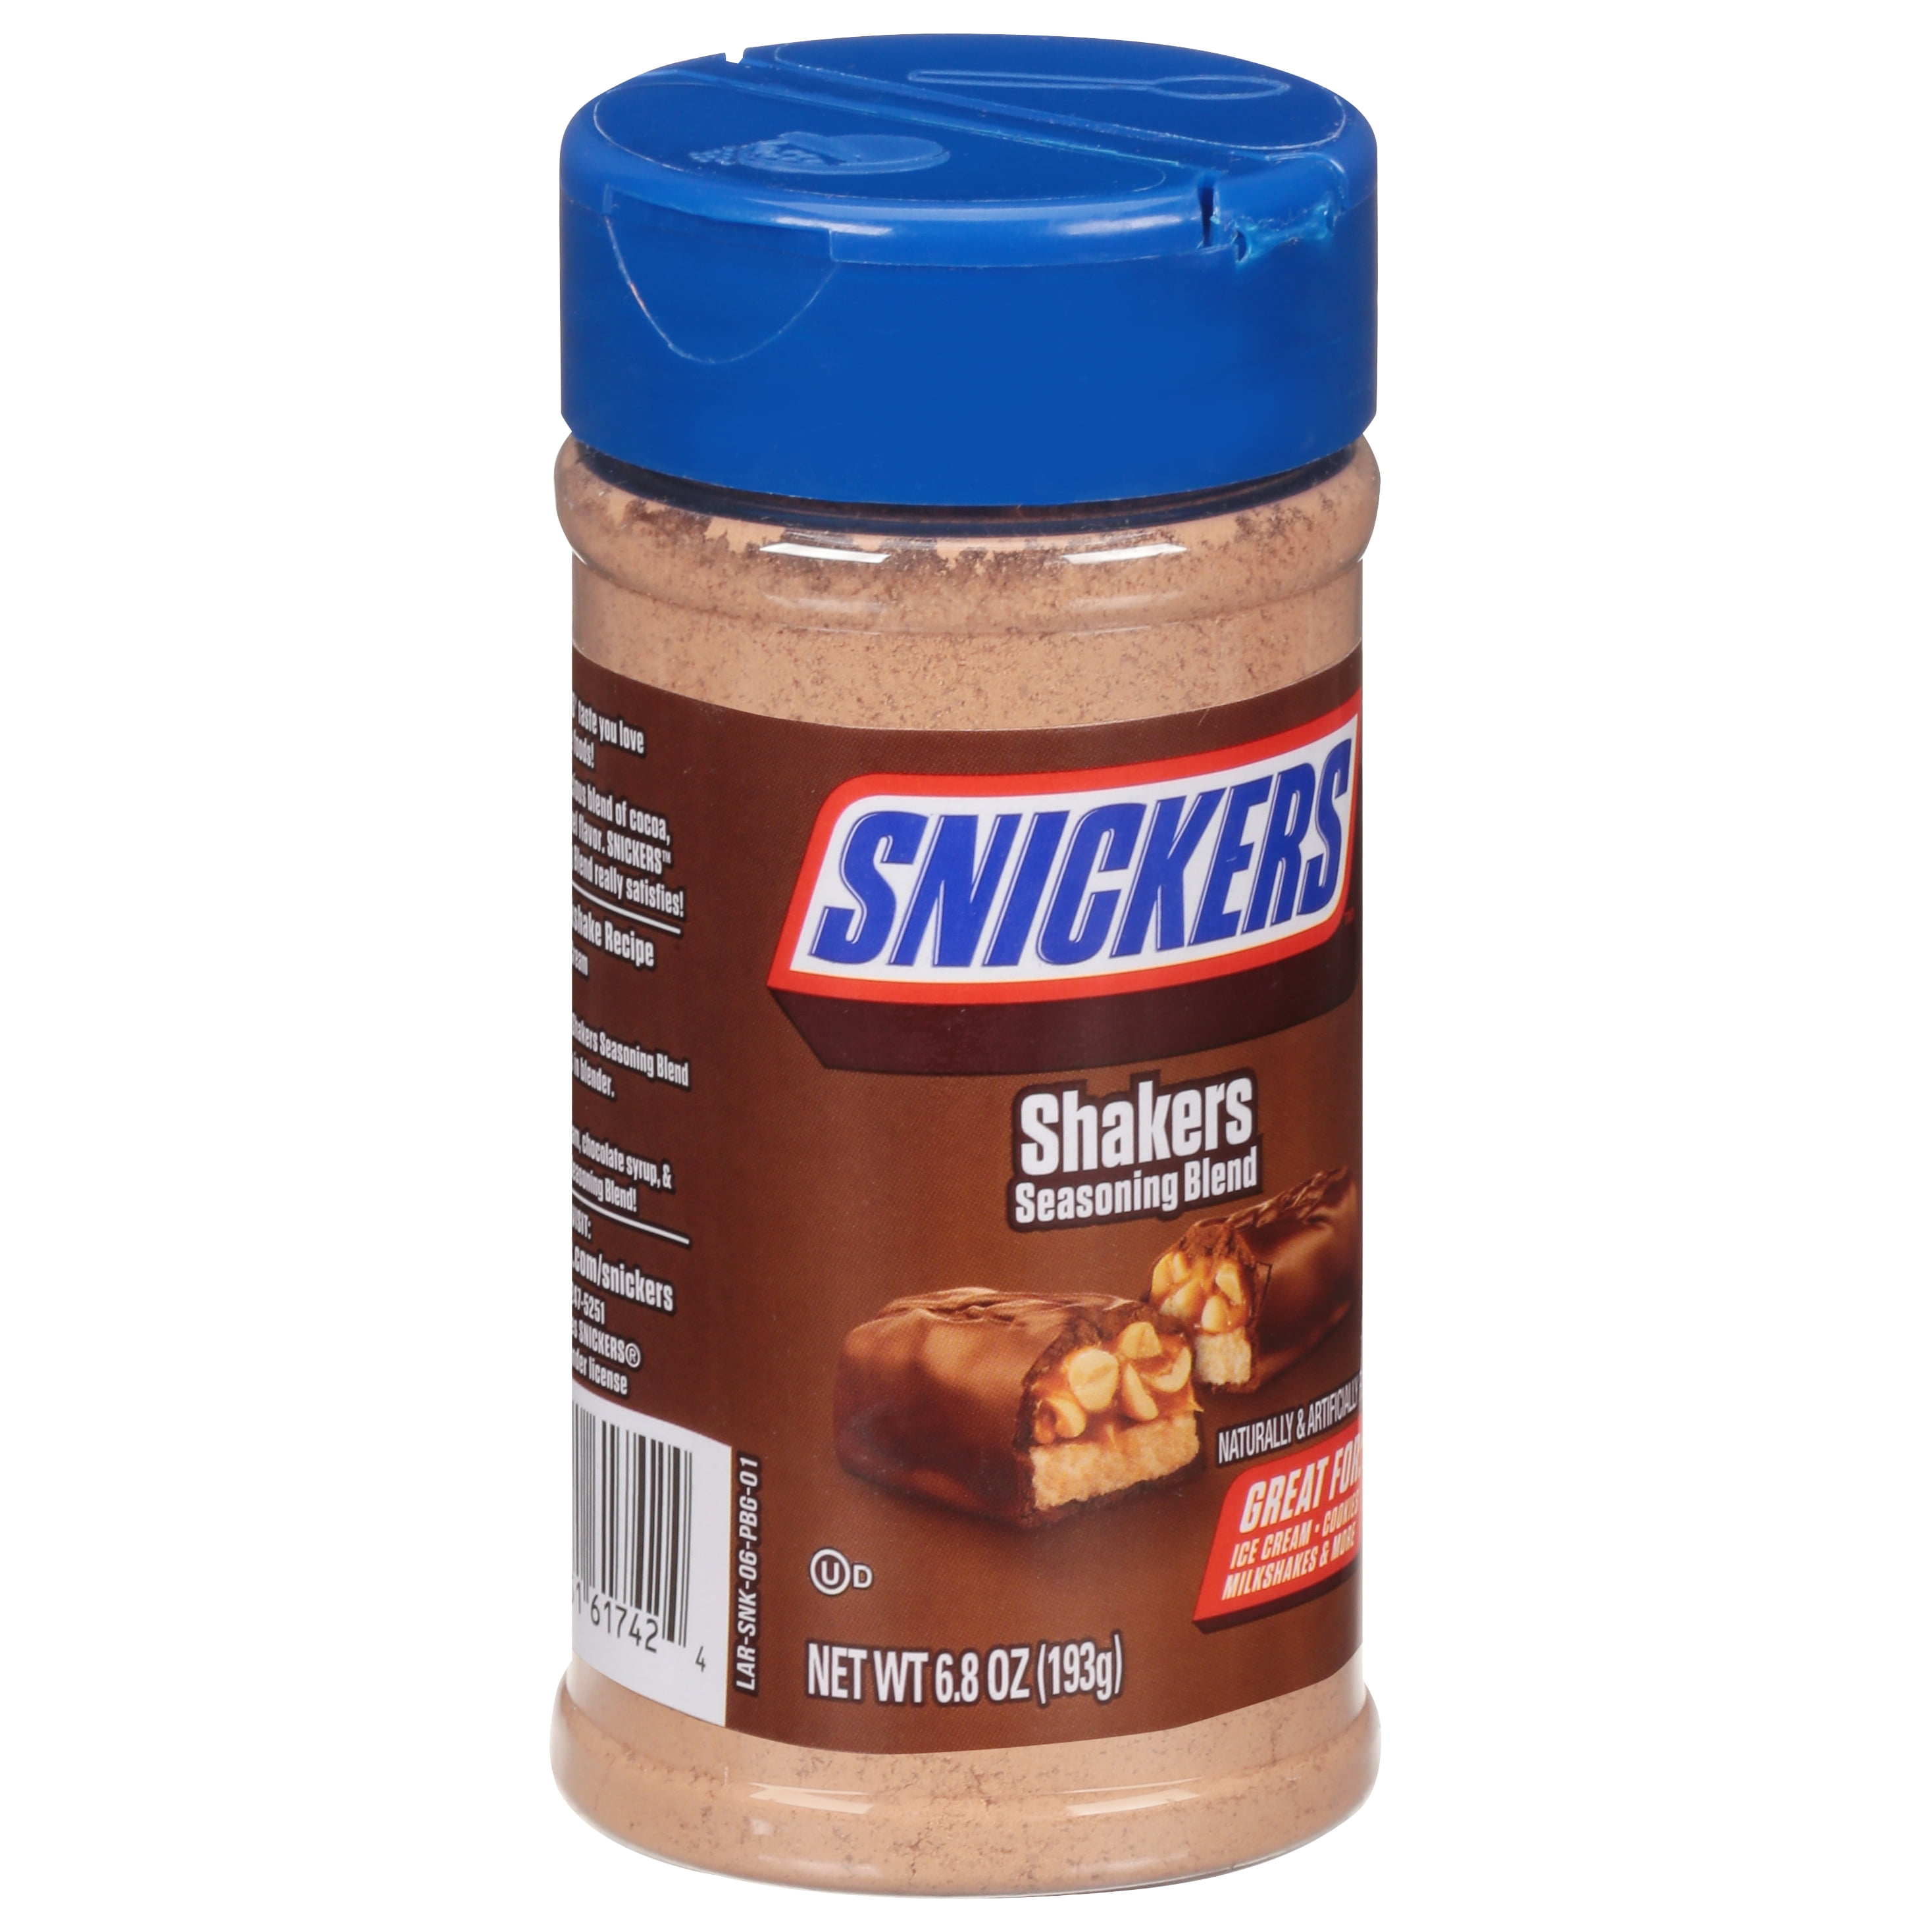 Snickers OR TWIX Shakers Seasoning Blend 6.8 oz or TWIX 3.7 oz